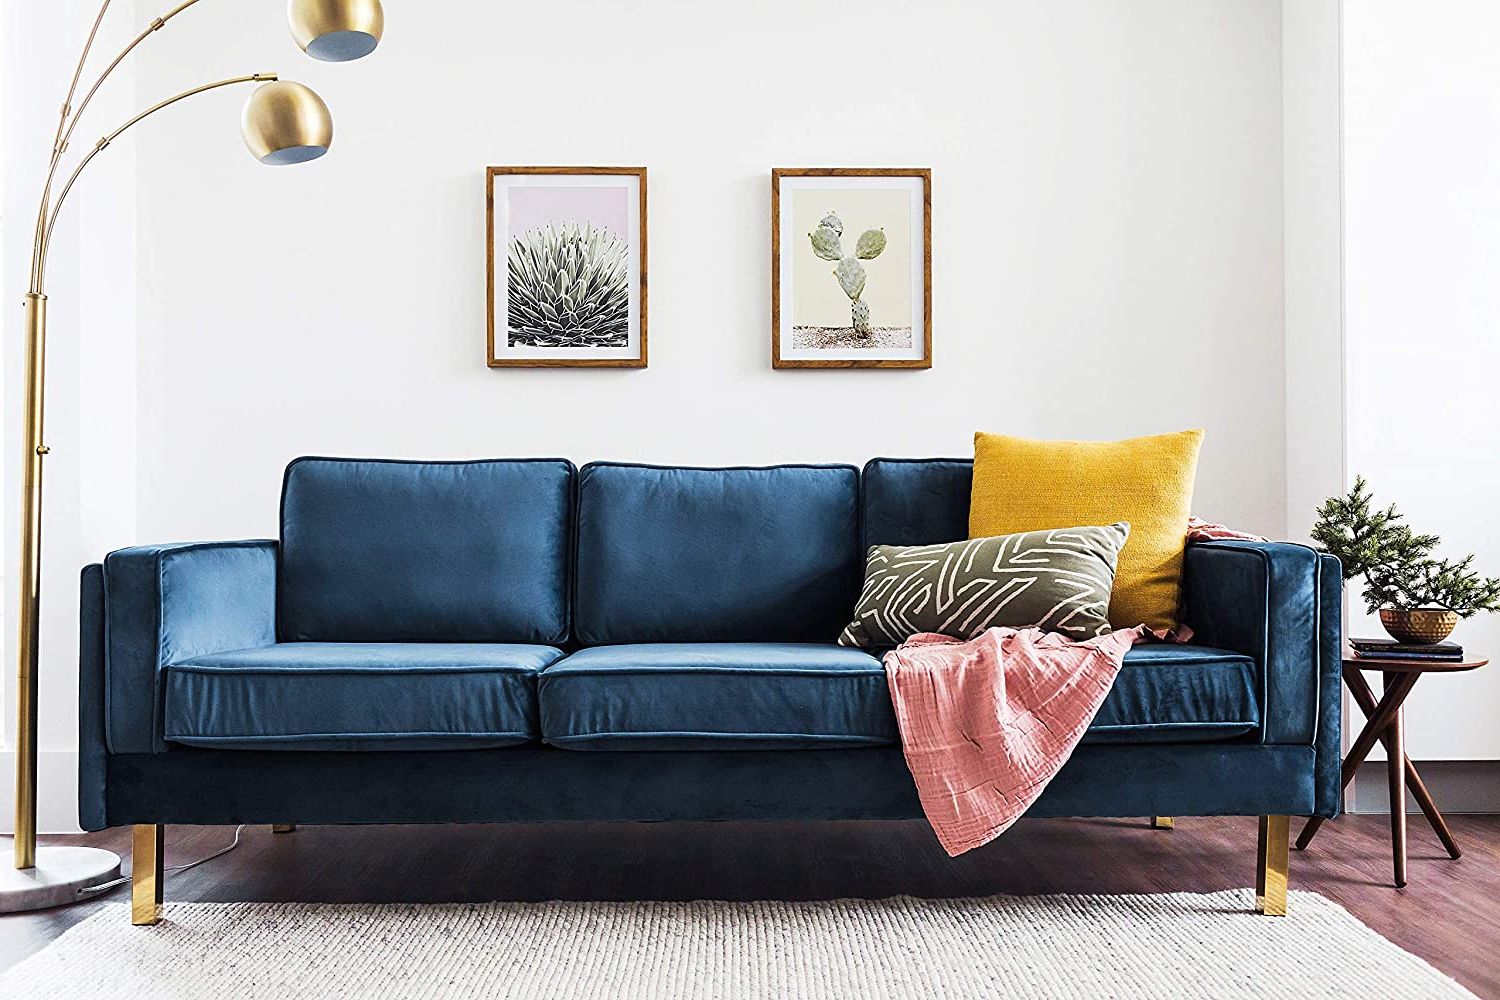 Blue Velvet Sofas With Creative Living Room Decor Ideas Throughout Sofas In Blue (View 7 of 20)